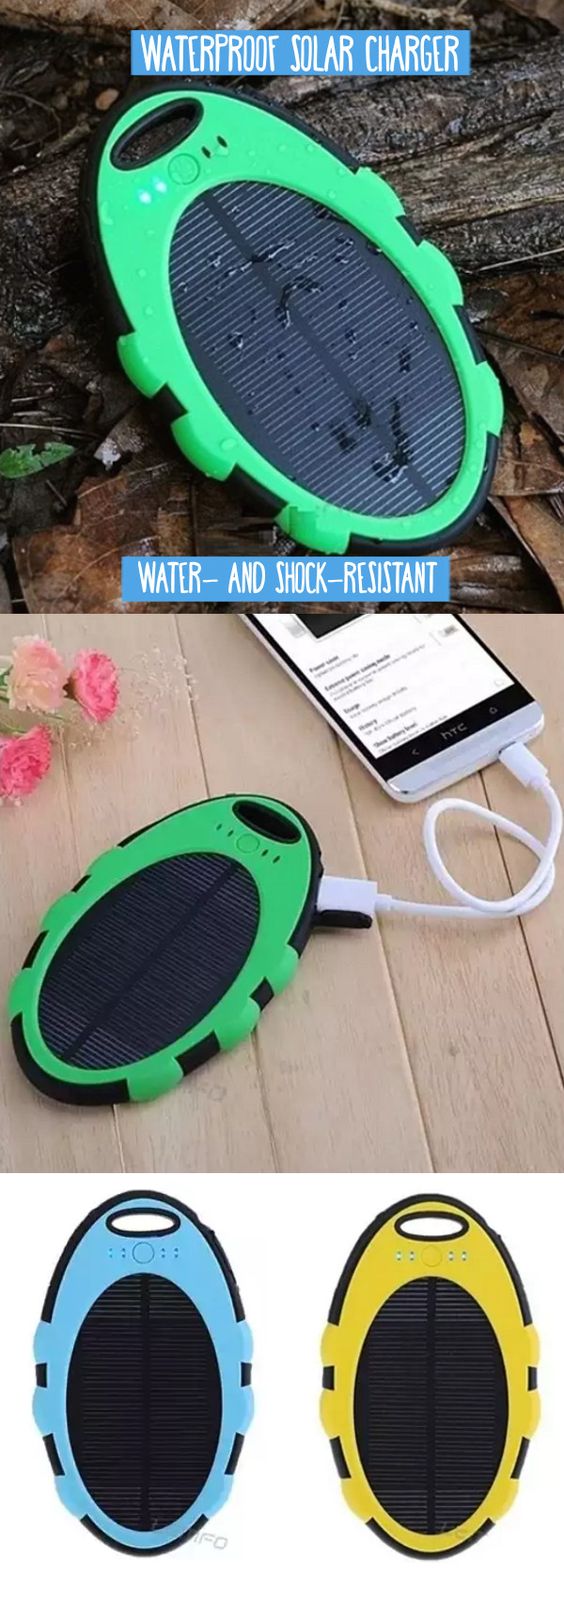 Go Green with this solar charger! At last, a solar charger for the real world. It's water and shock resistant, and includes a hook to attach to your keychain, backpack or purse. With a USB port for easy charging, it's perfect for the outdoor enthusiast who wants to take on rainy autumn days, snowy winter months, or just relax poolside in the summer. Featuring a football grain design, the charger also has an anti skid padding to withstand shock.